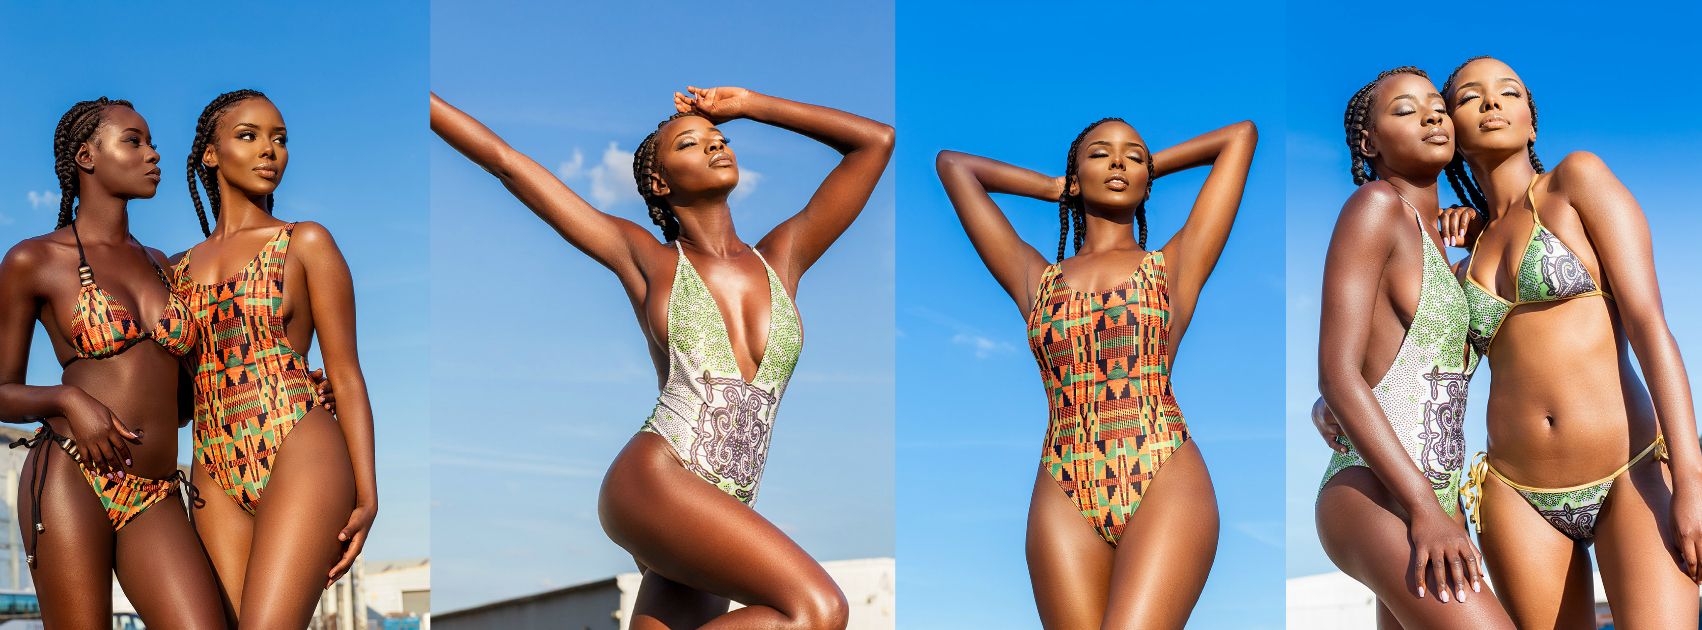 African-Owned Fashion Brand Highlights Ghanaian Royalty Through Swimwear